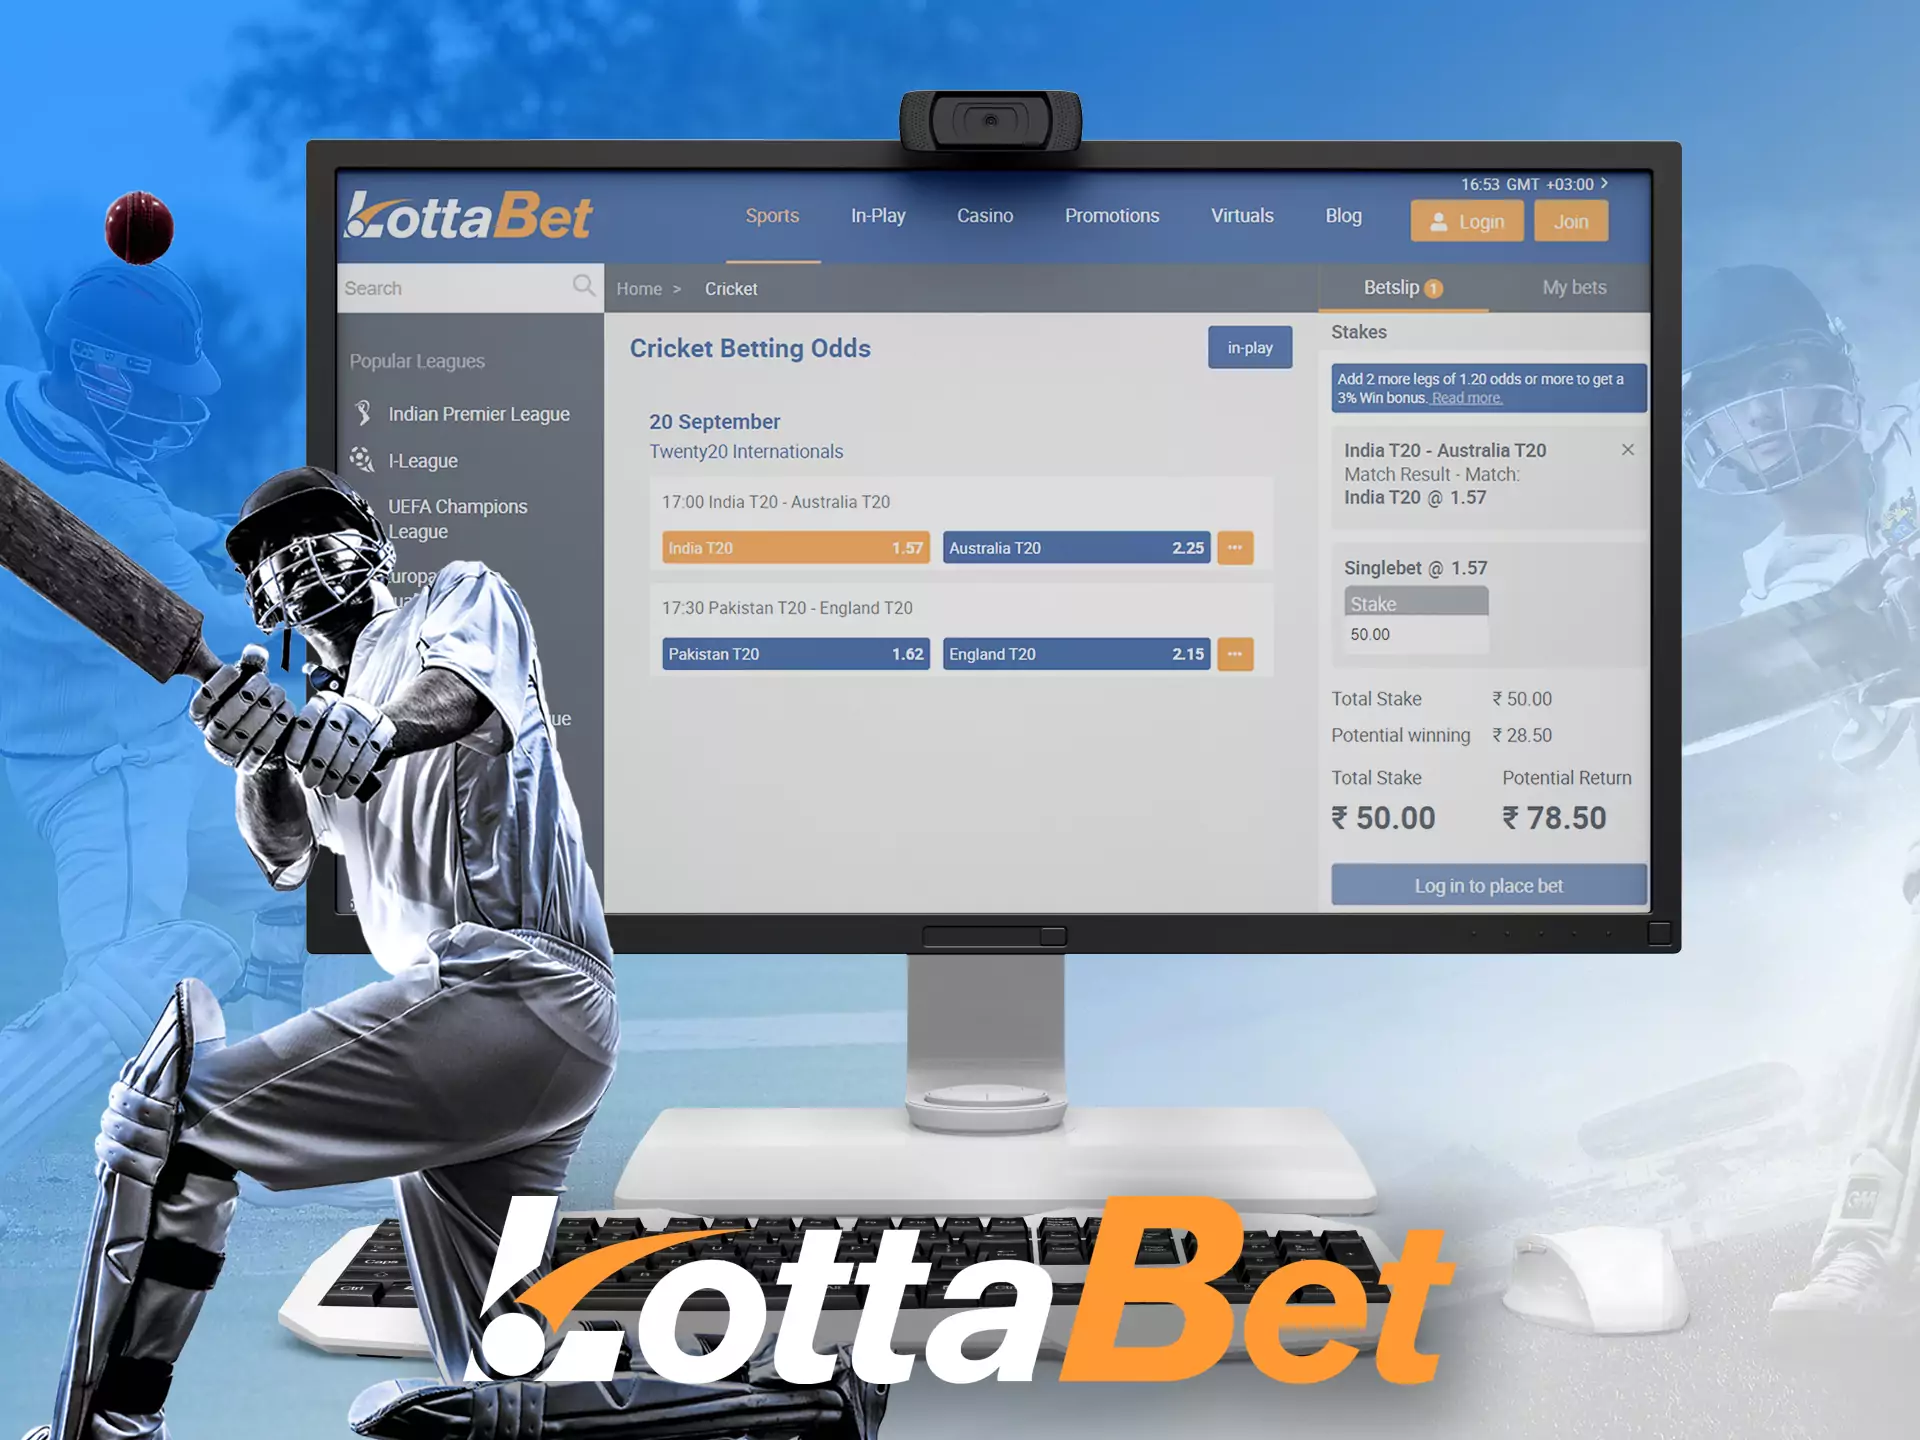 Cricket is the most popular sports discipline among Indians using Lottabet.